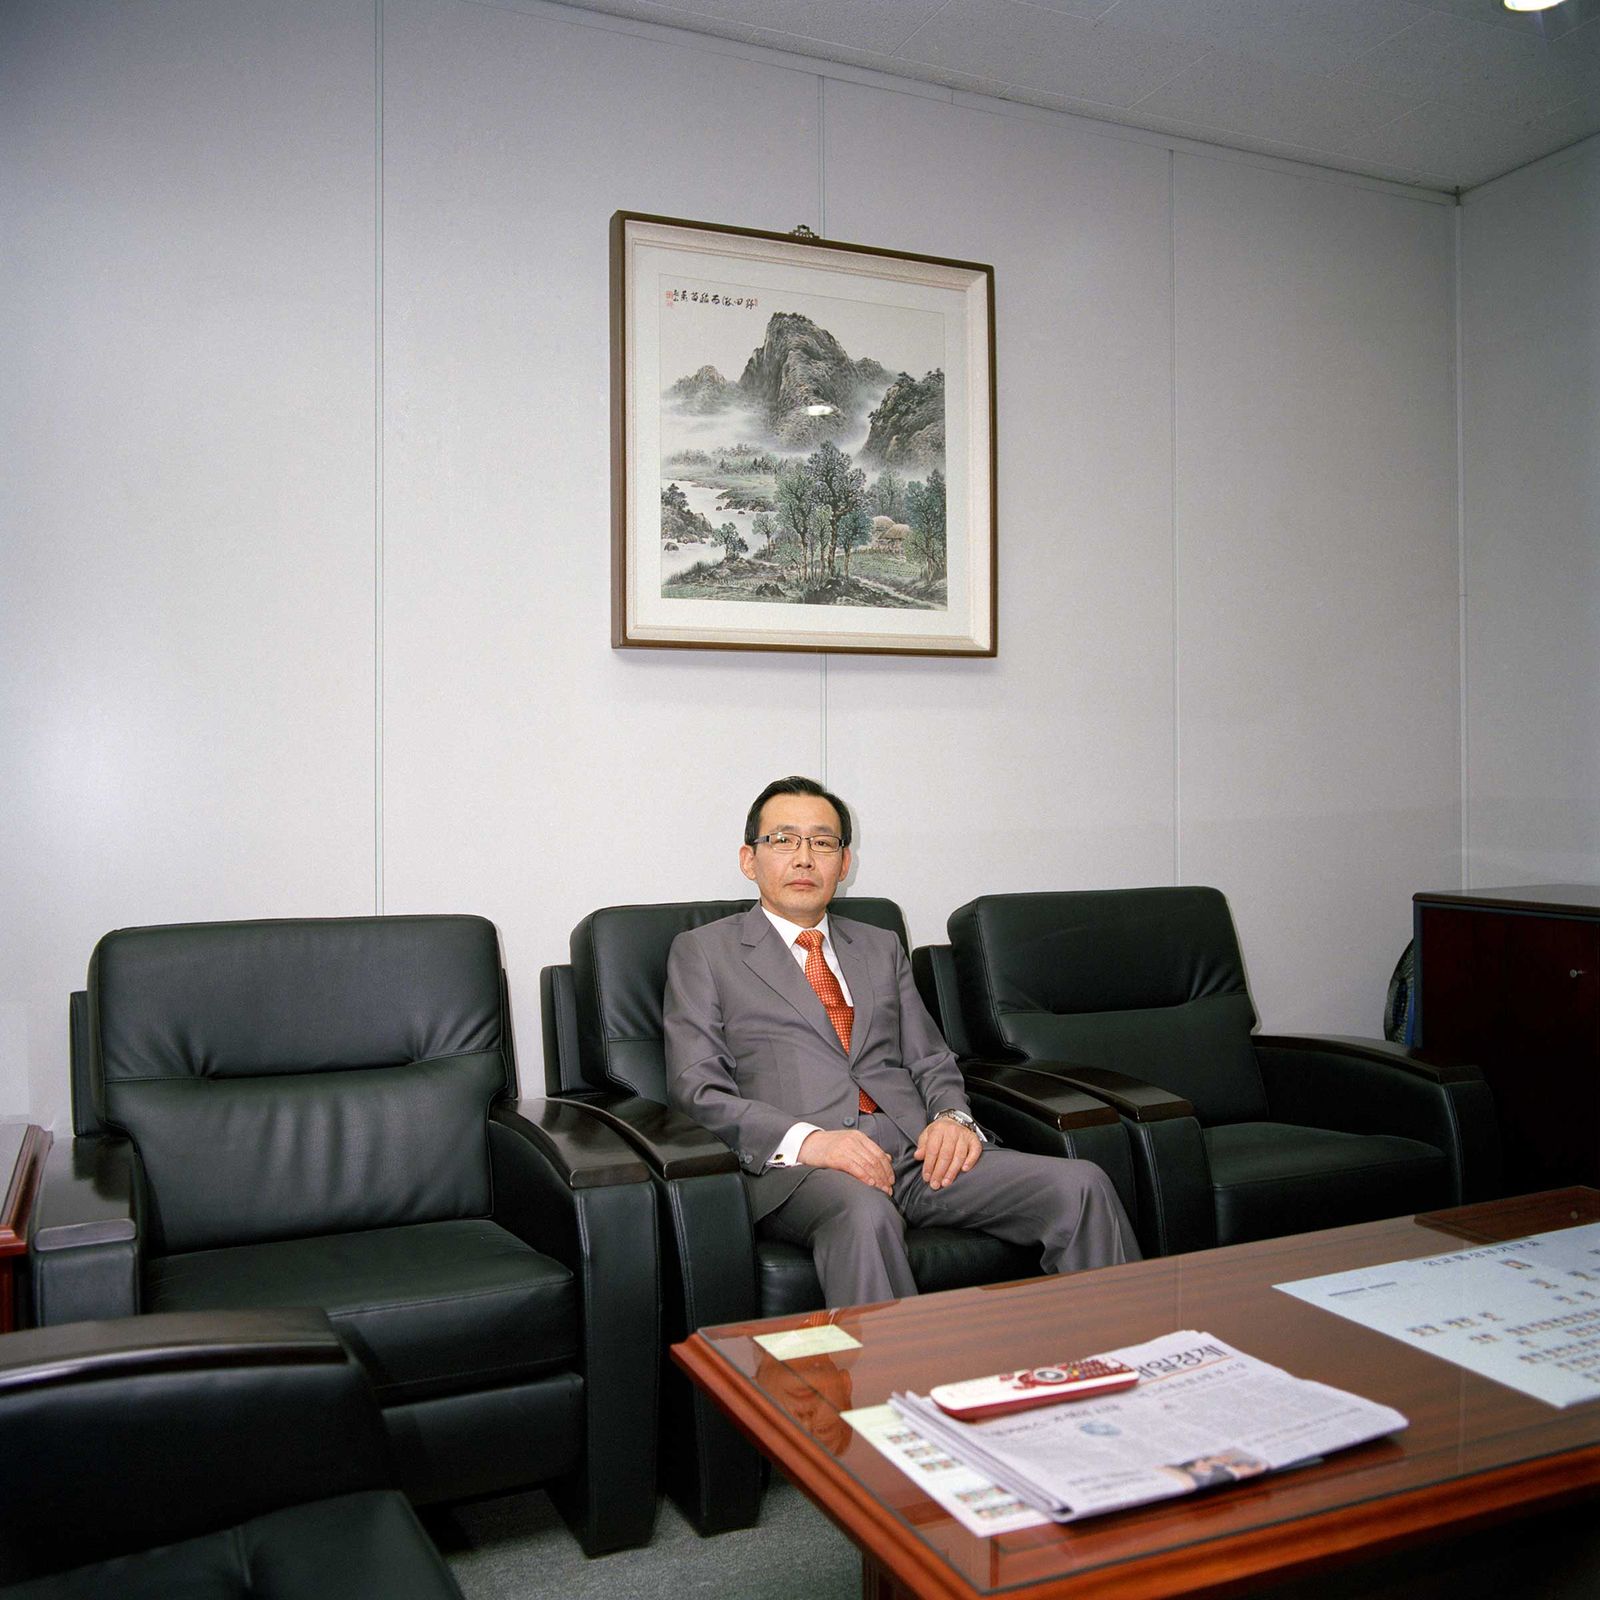 © Lee Grant - My uncle, a career South Korean diplomat, in his office, Seoul, 2011